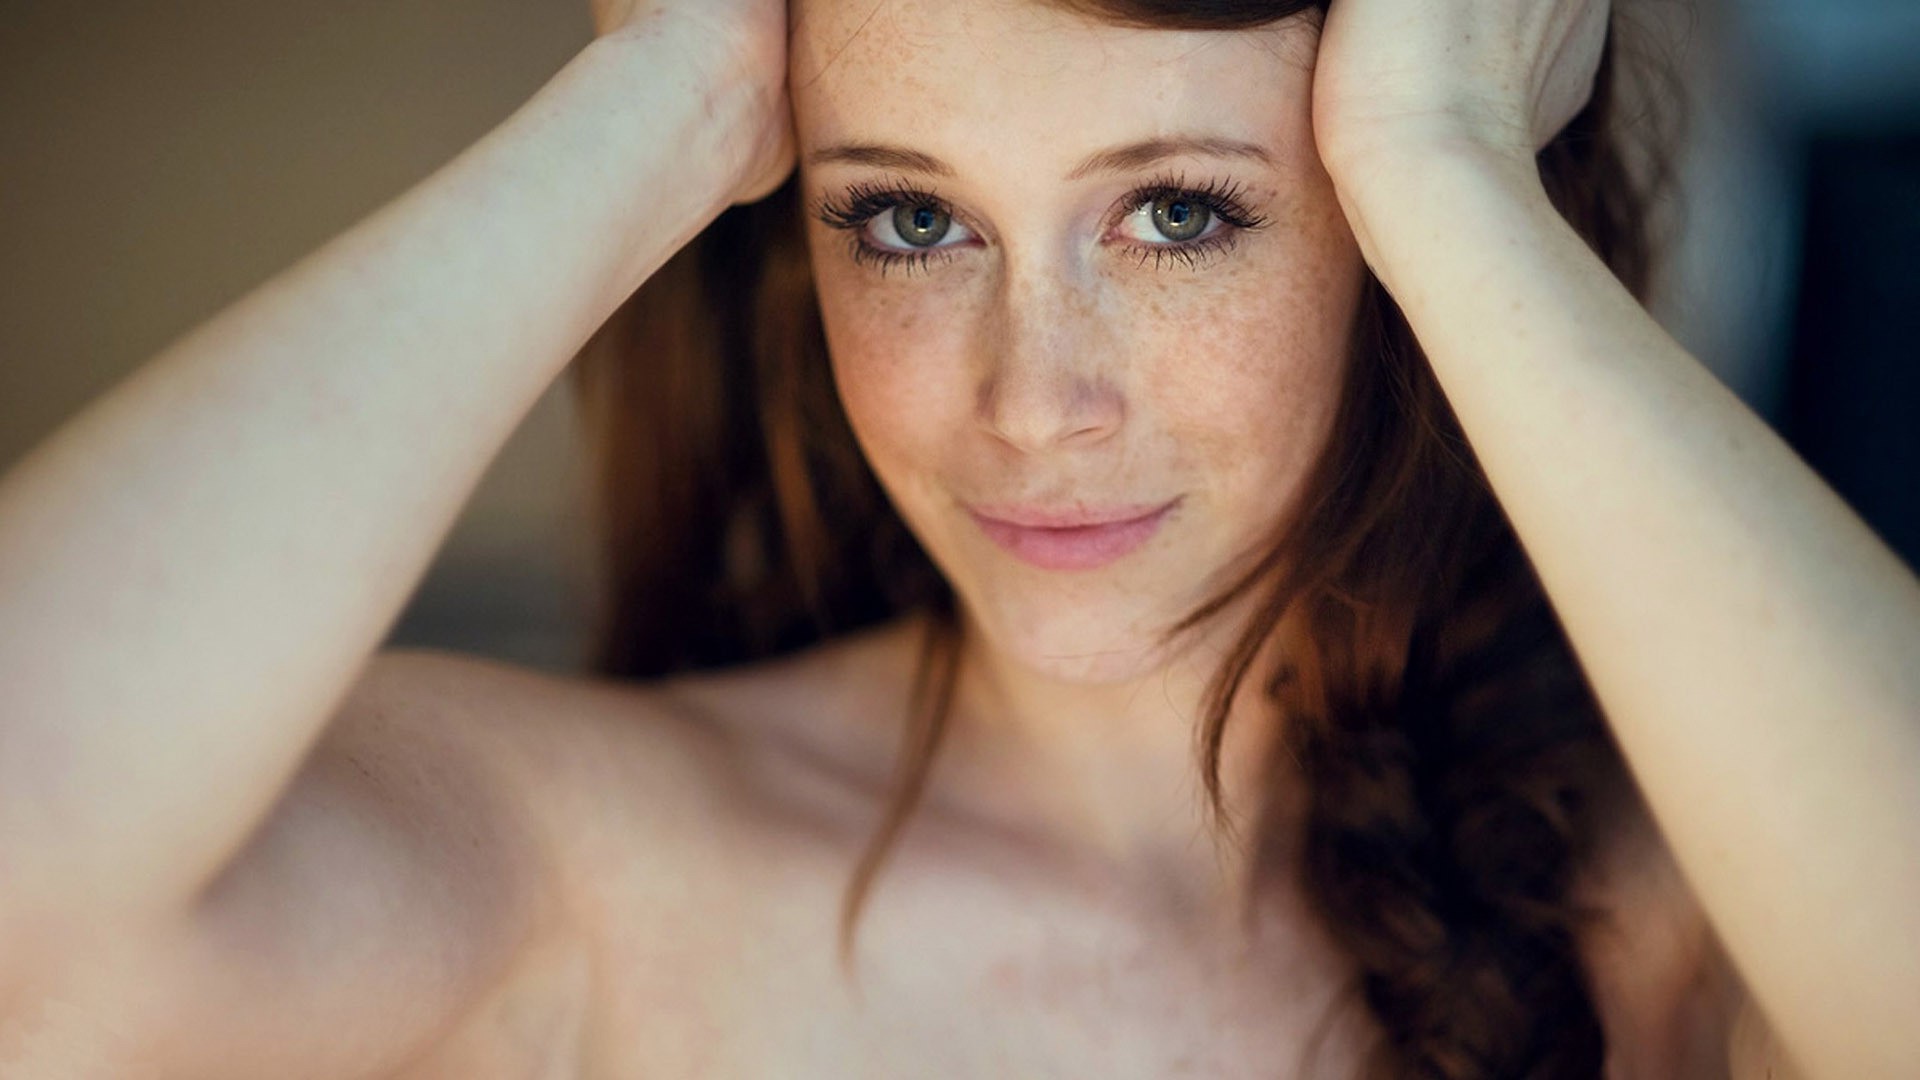 women, Model, Redhead, Long Hair, Looking At Viewer, Face, Portrait, Charlotte Herbert, Chad Suicide, Depth Of Field, Blue Eyes, Smiling, Hands On Head, Freckles, Bare Shoulders Wallpaper